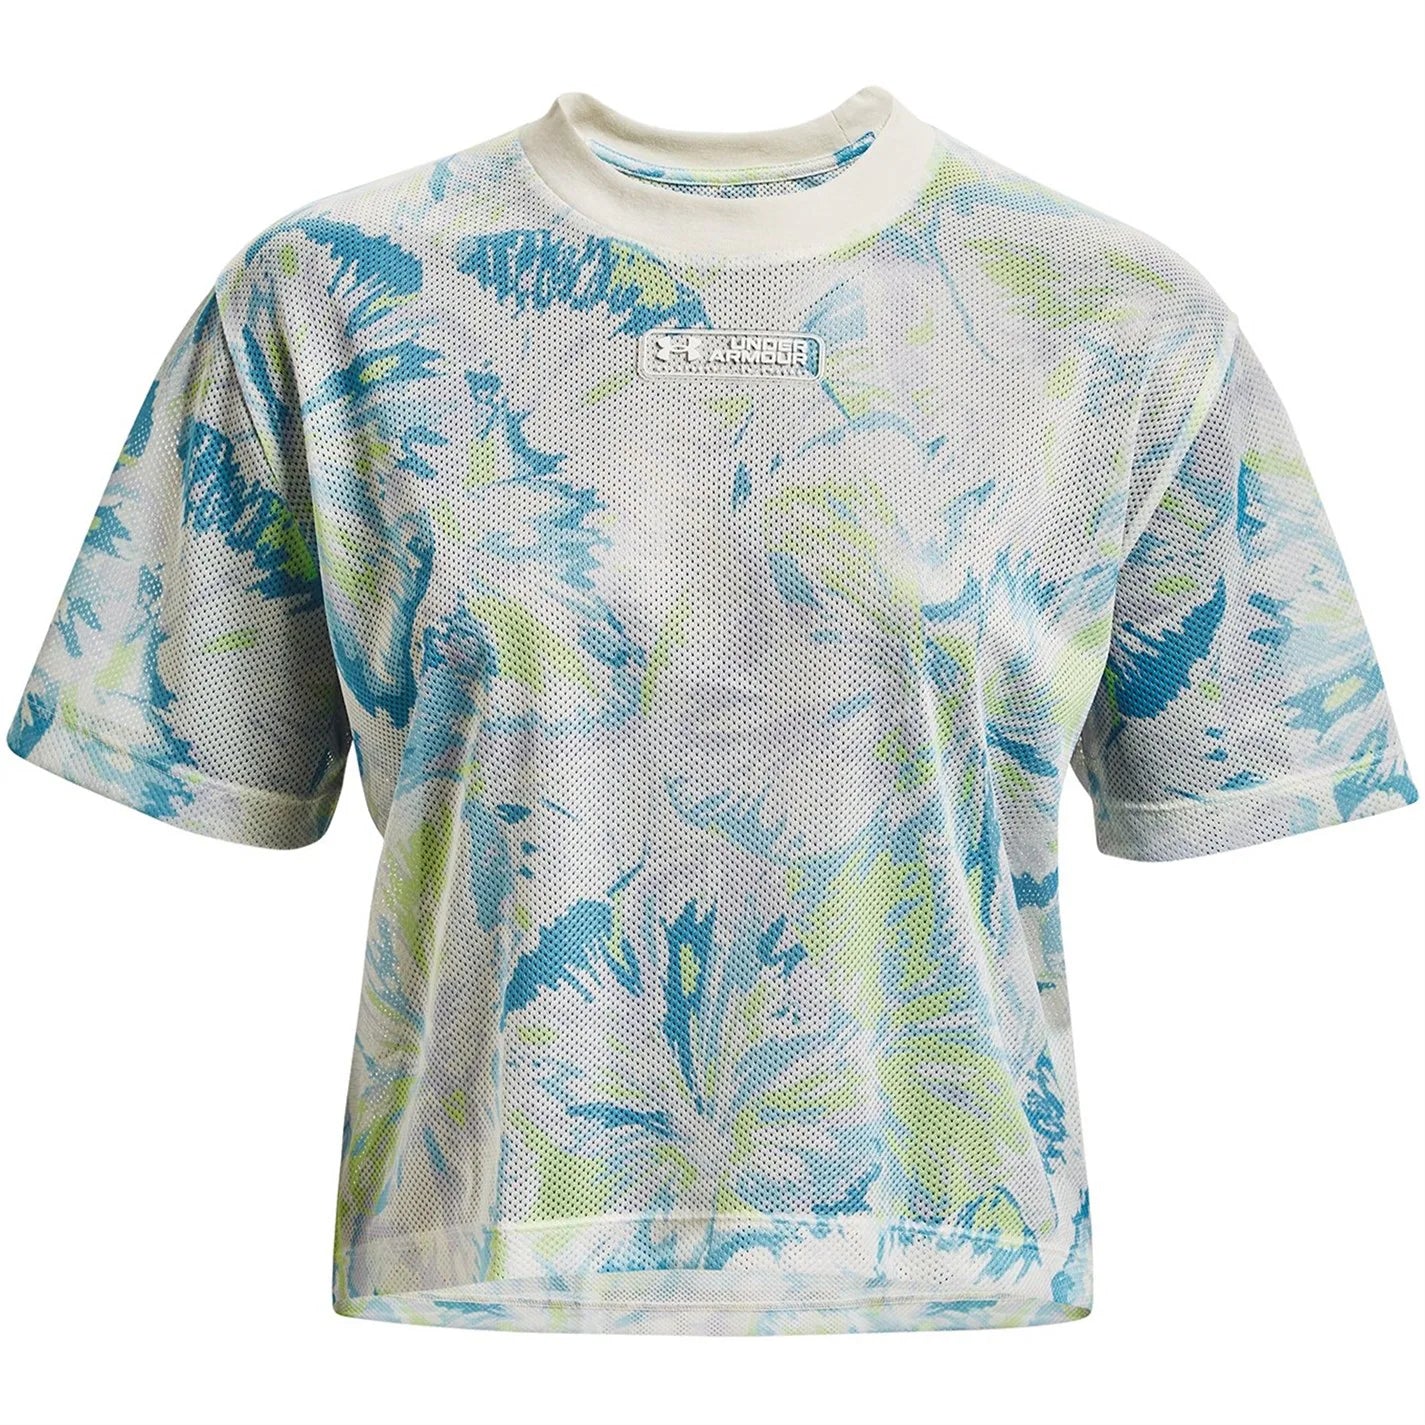 UNDER ARMOUR WOMEN'S MESH PRINTED T SHIRT - FLORAL